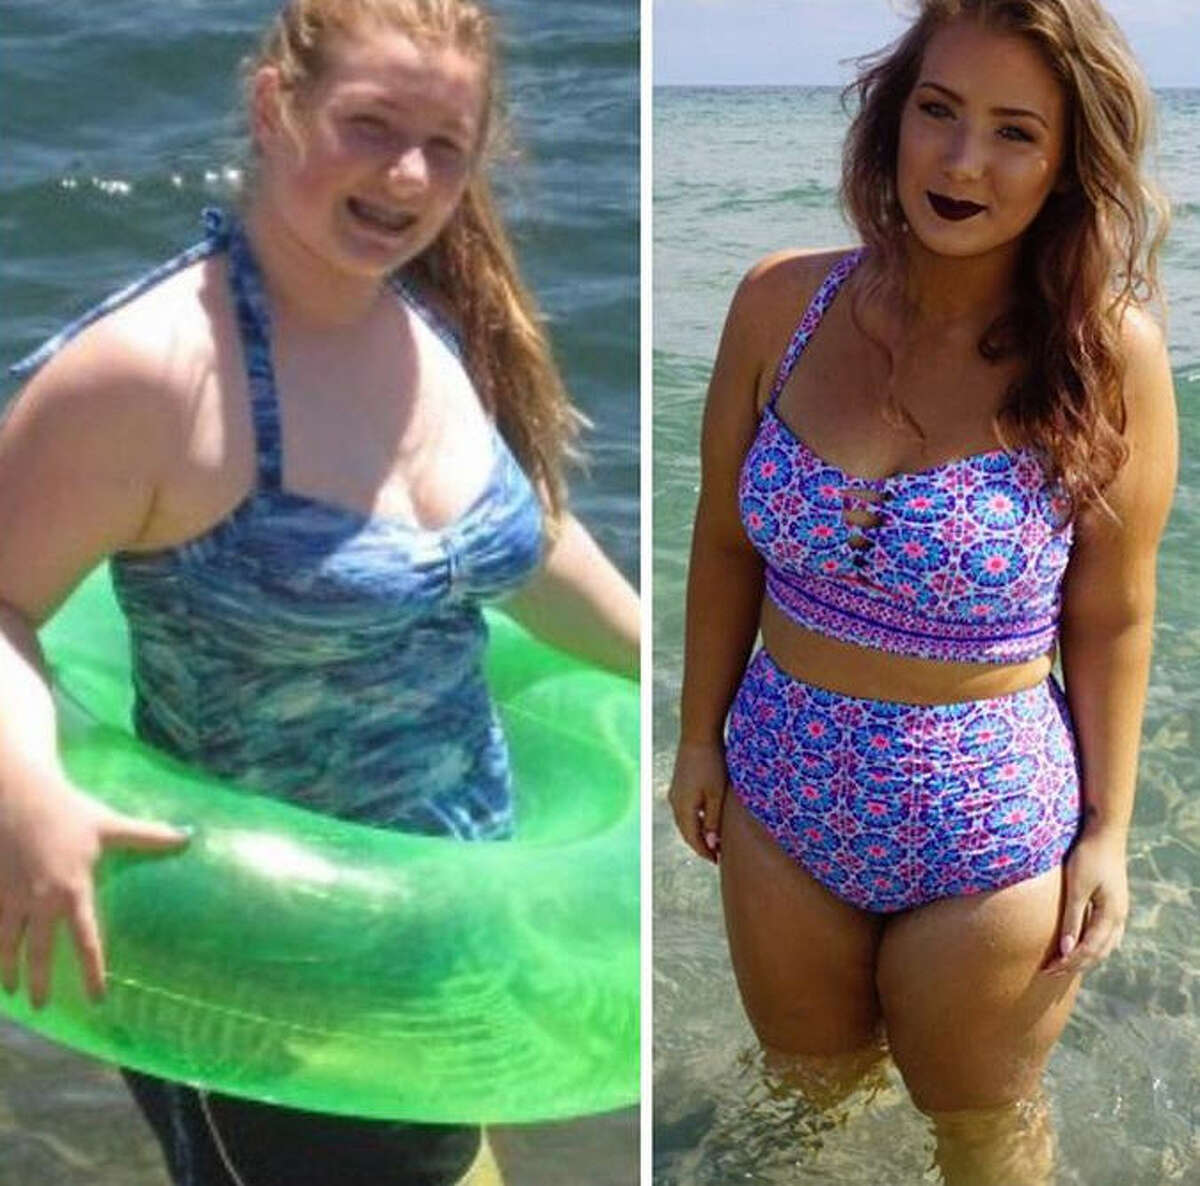 Morgan Bartley, 21, has used Instagram and her 173,000 followers to help hold her accountable during her weight loss journey.